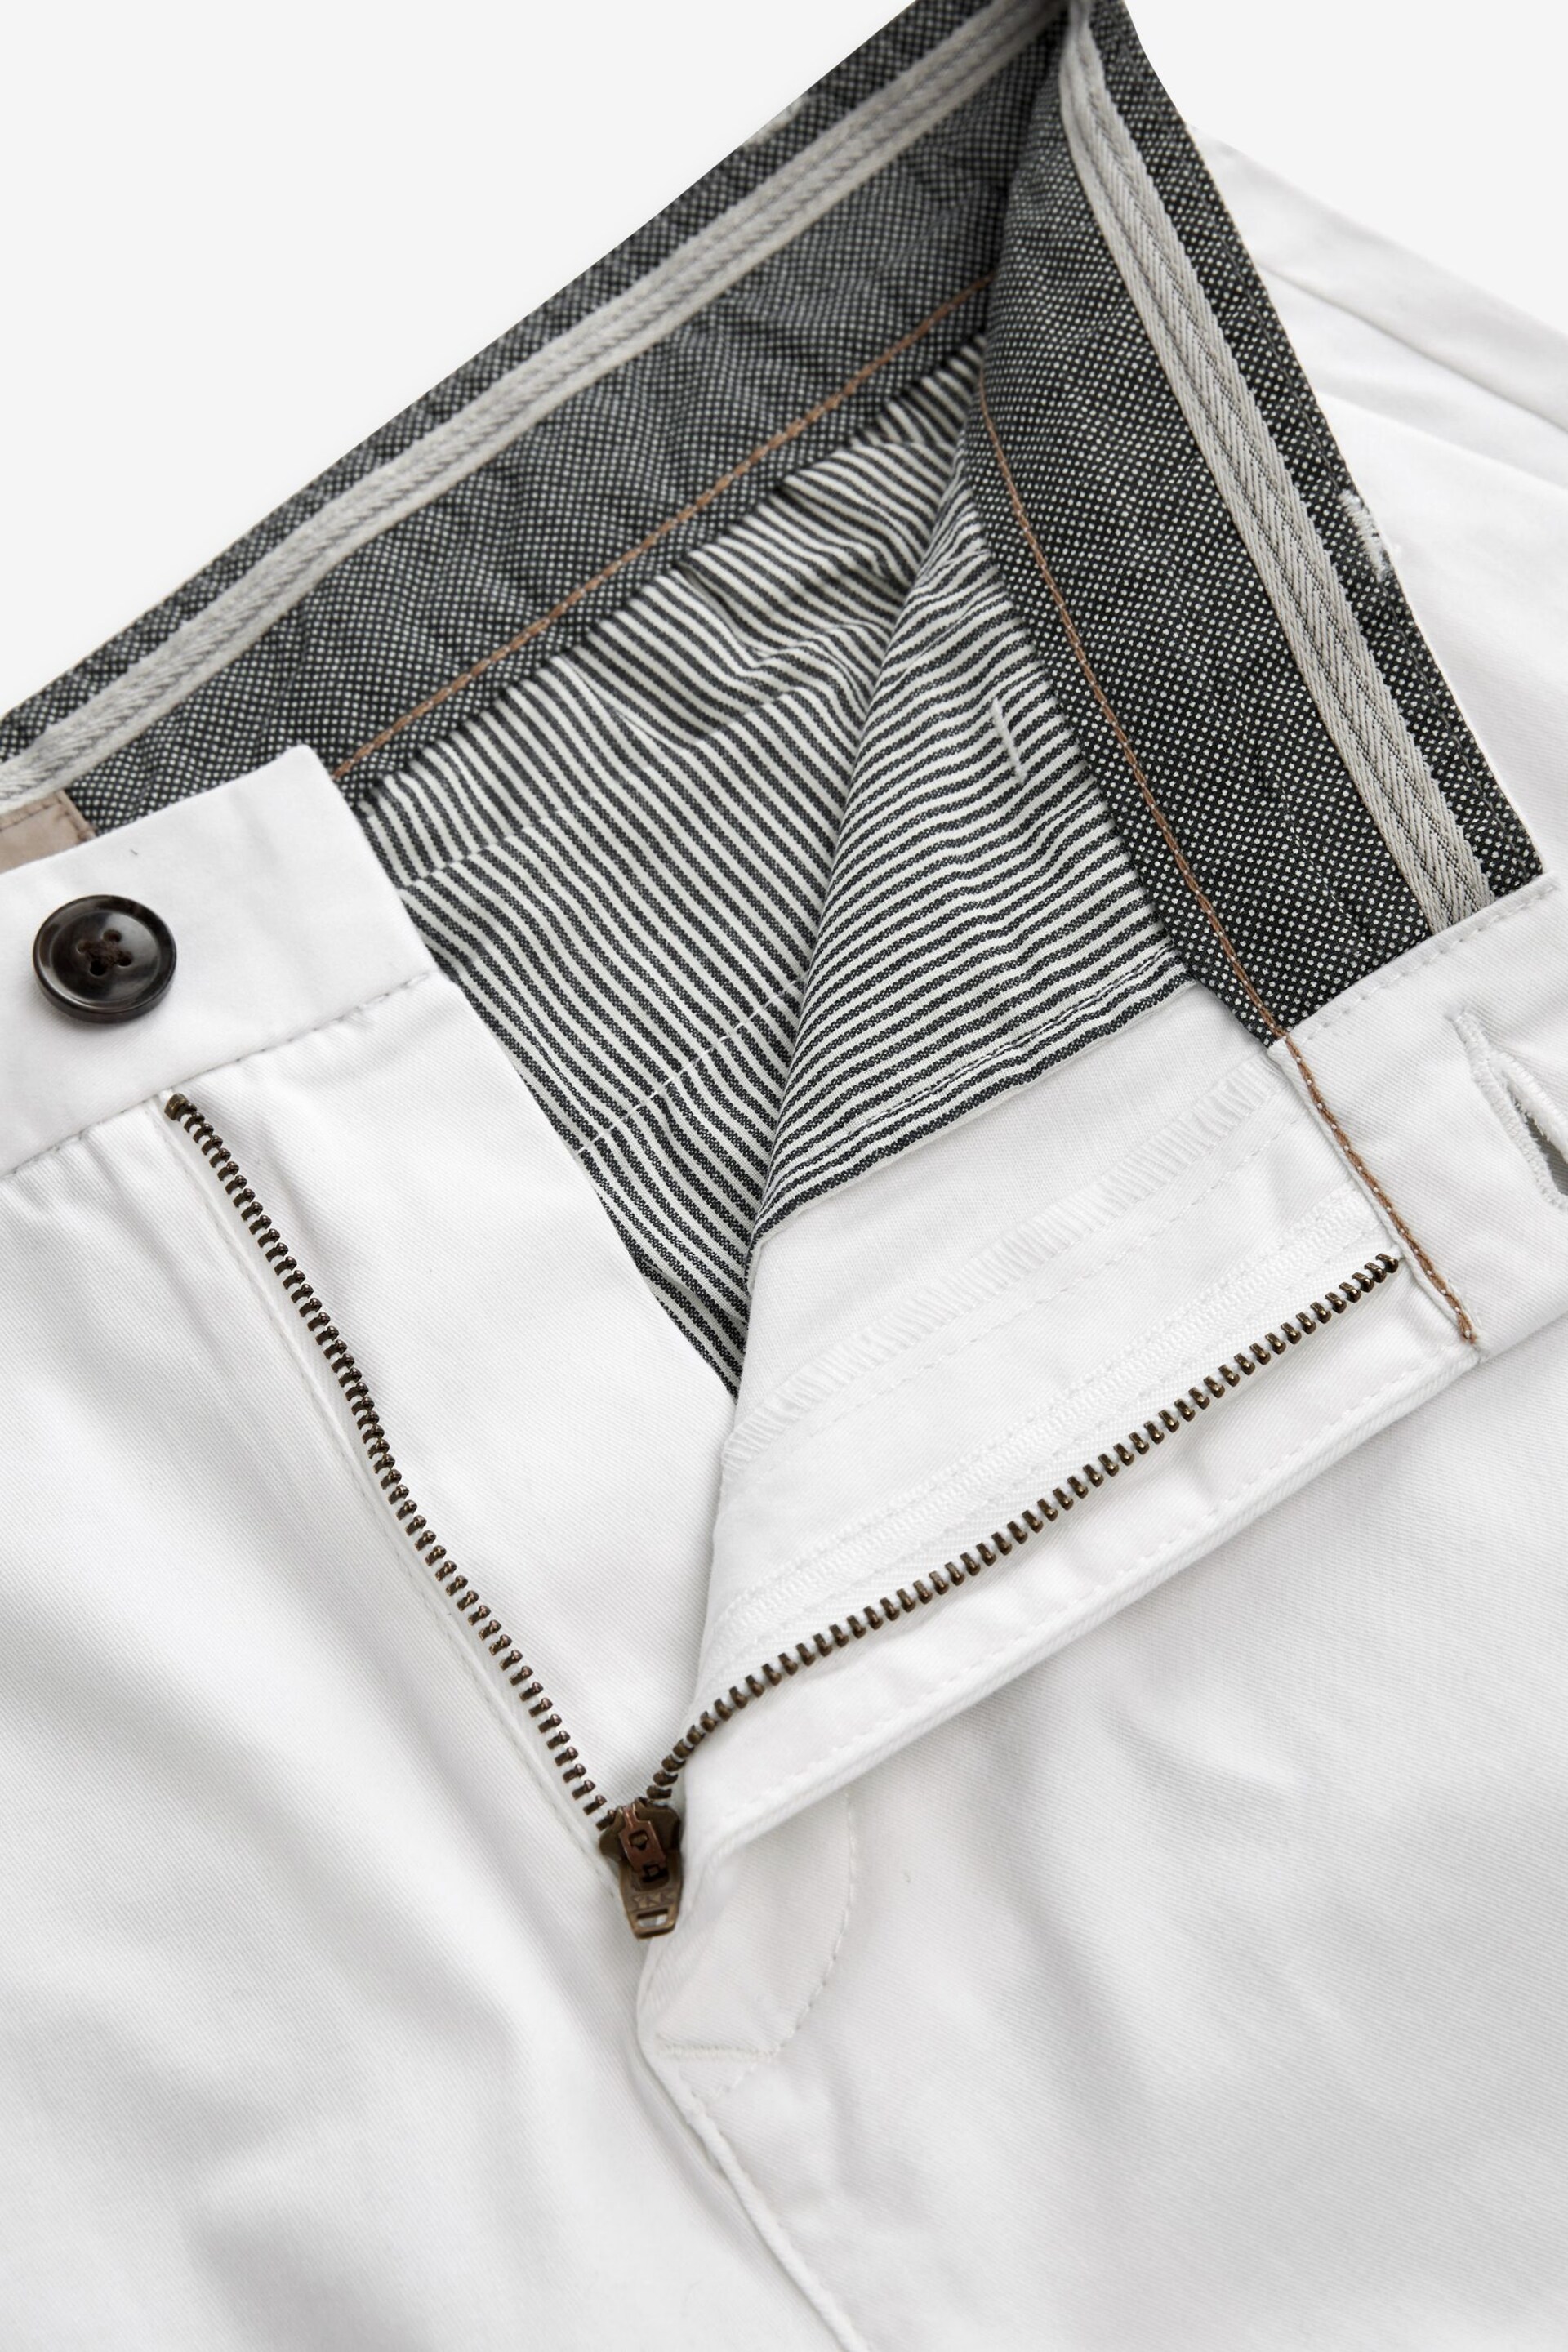 White Slim Fit Stretch Chinos Shorts - Image 5 of 8